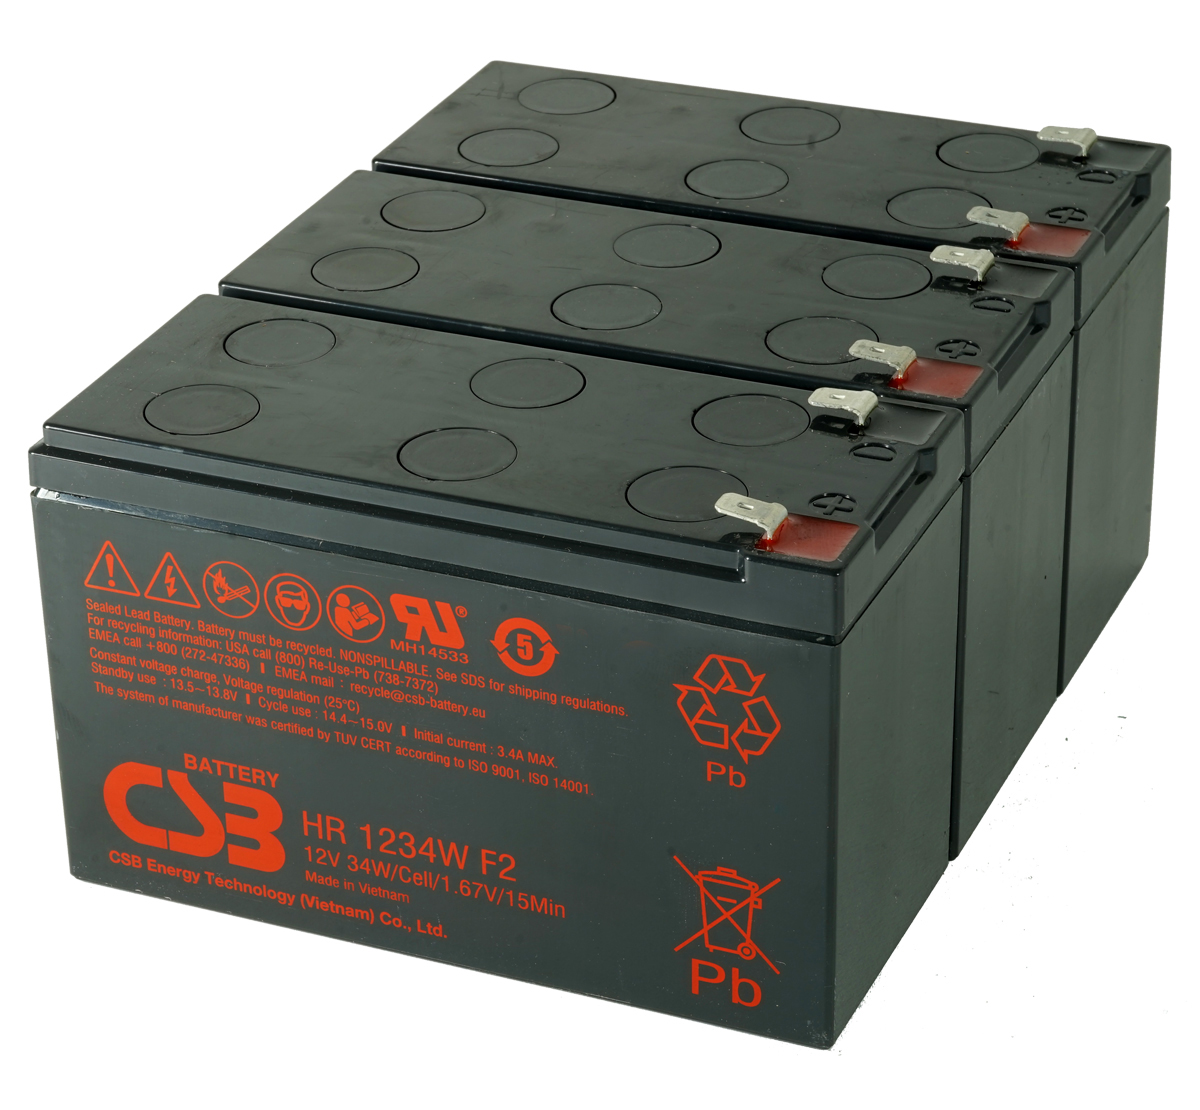 MDS2405 UPS Battery Kit for MGE AB2405